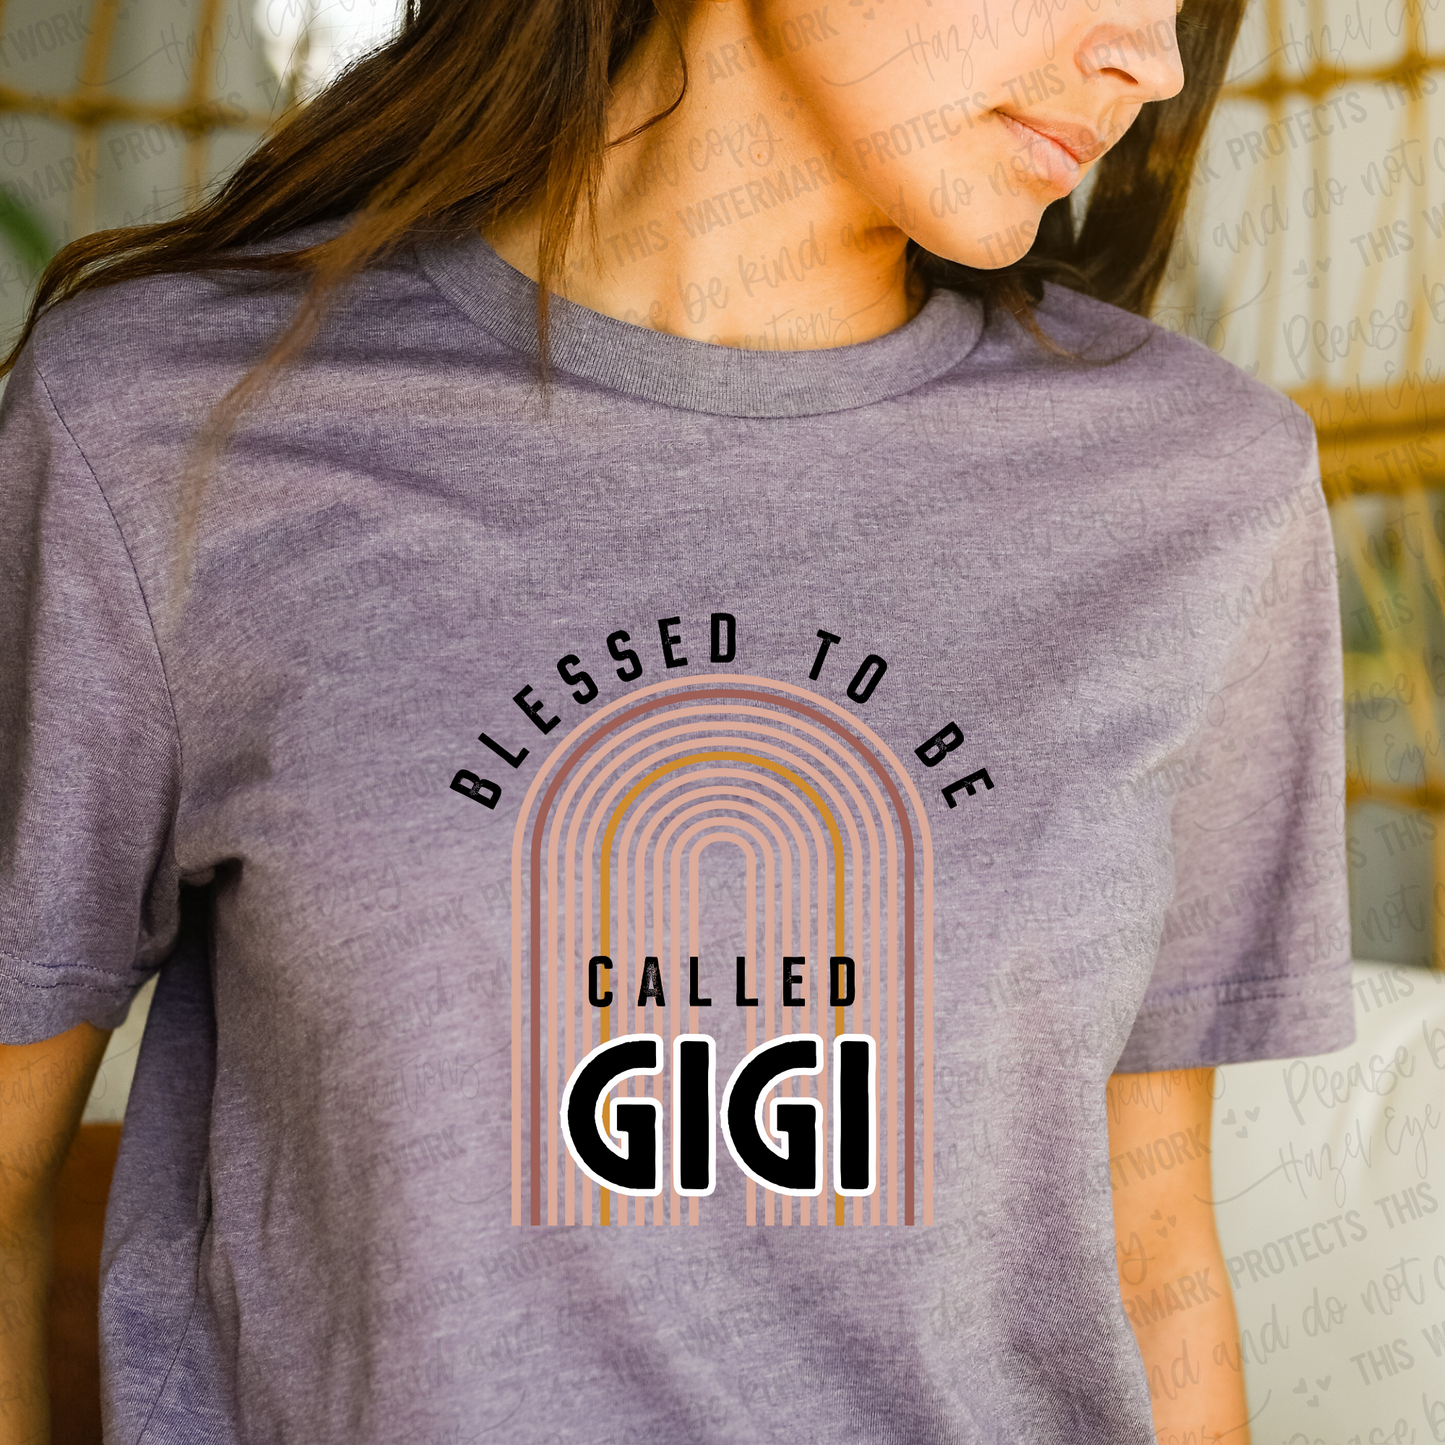 Blessed to be called gigi